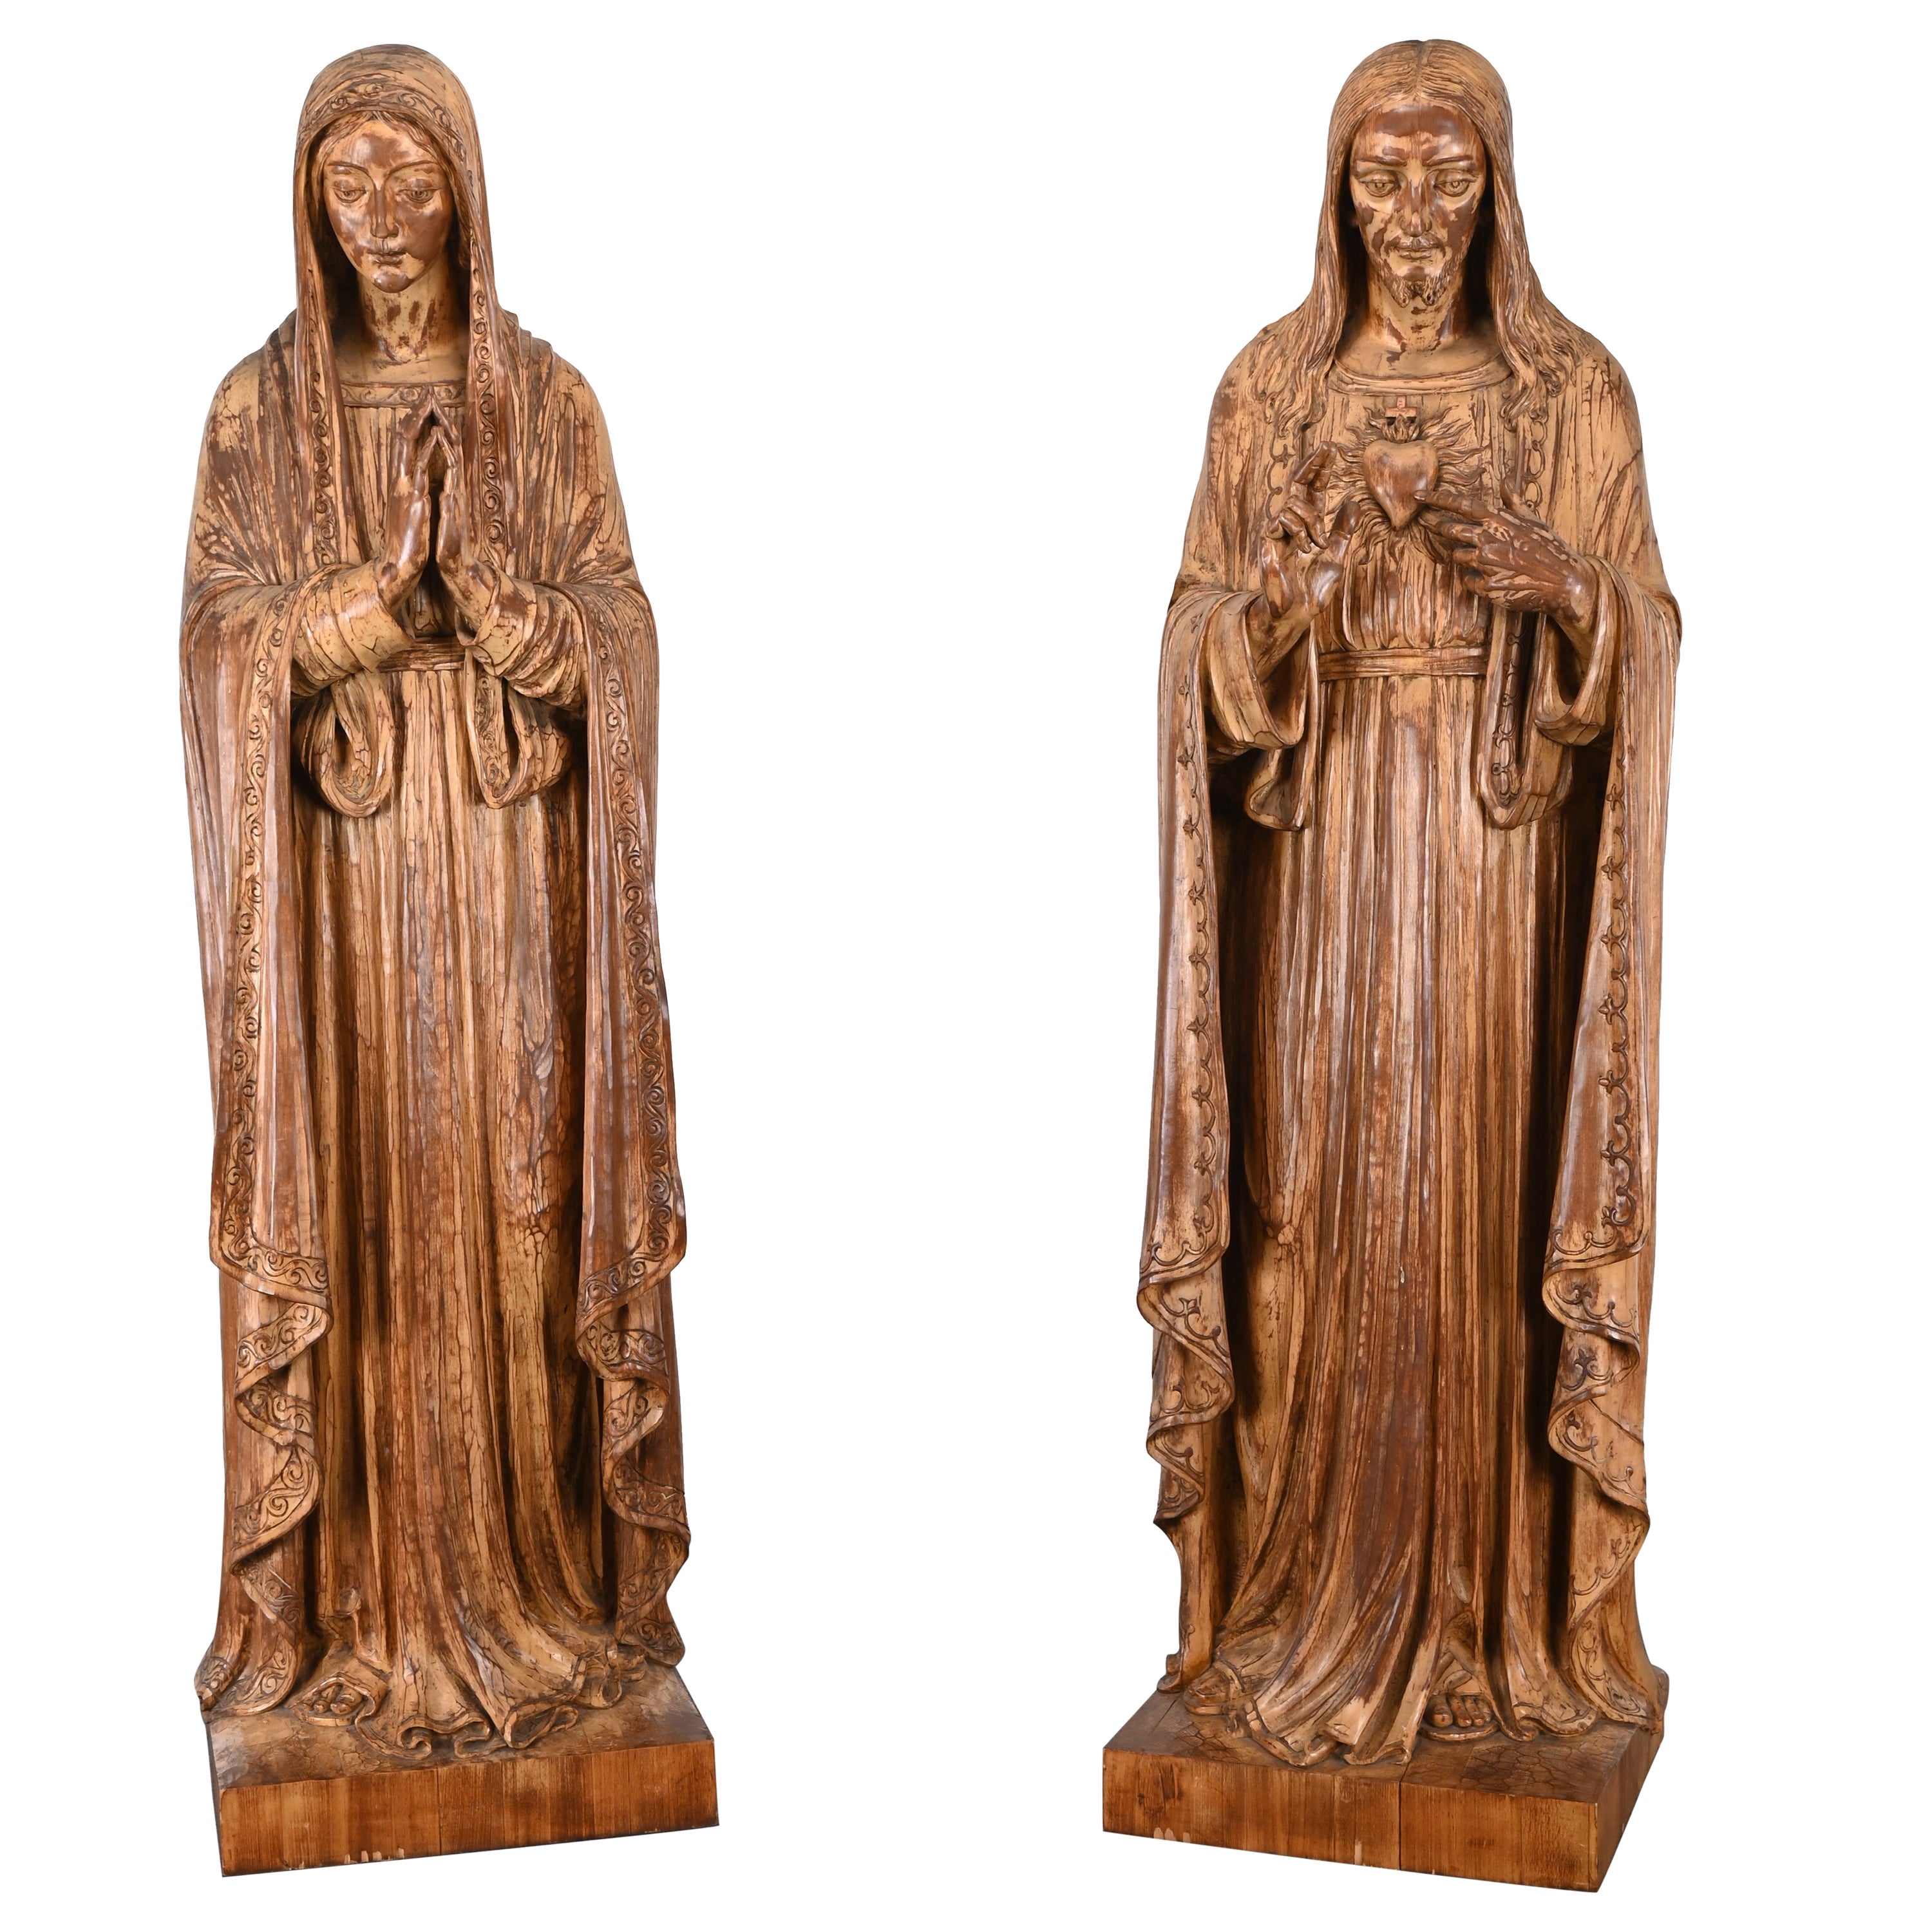 Monumental Jesus and Virgin Mary Folk Art Sculptures from the Jesuit Center For Sale